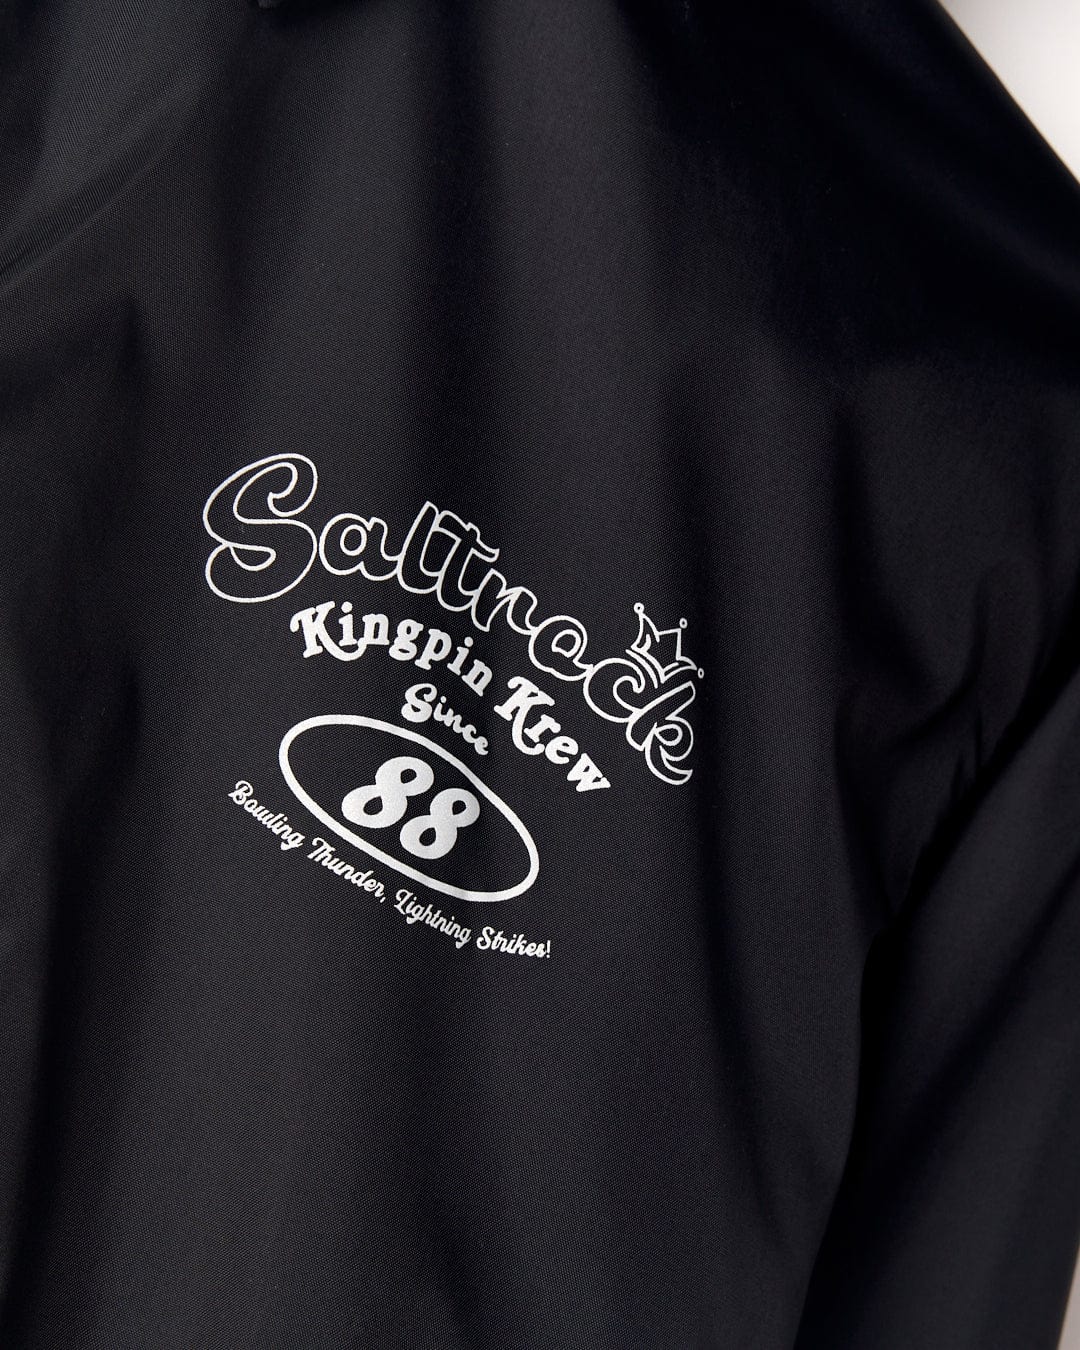 Black fabric with a white printed design saying "Saltrock Kingpin Krew" along with "88" and "summoning thunder lightning strikes!" in an ornate font, featuring a detachable